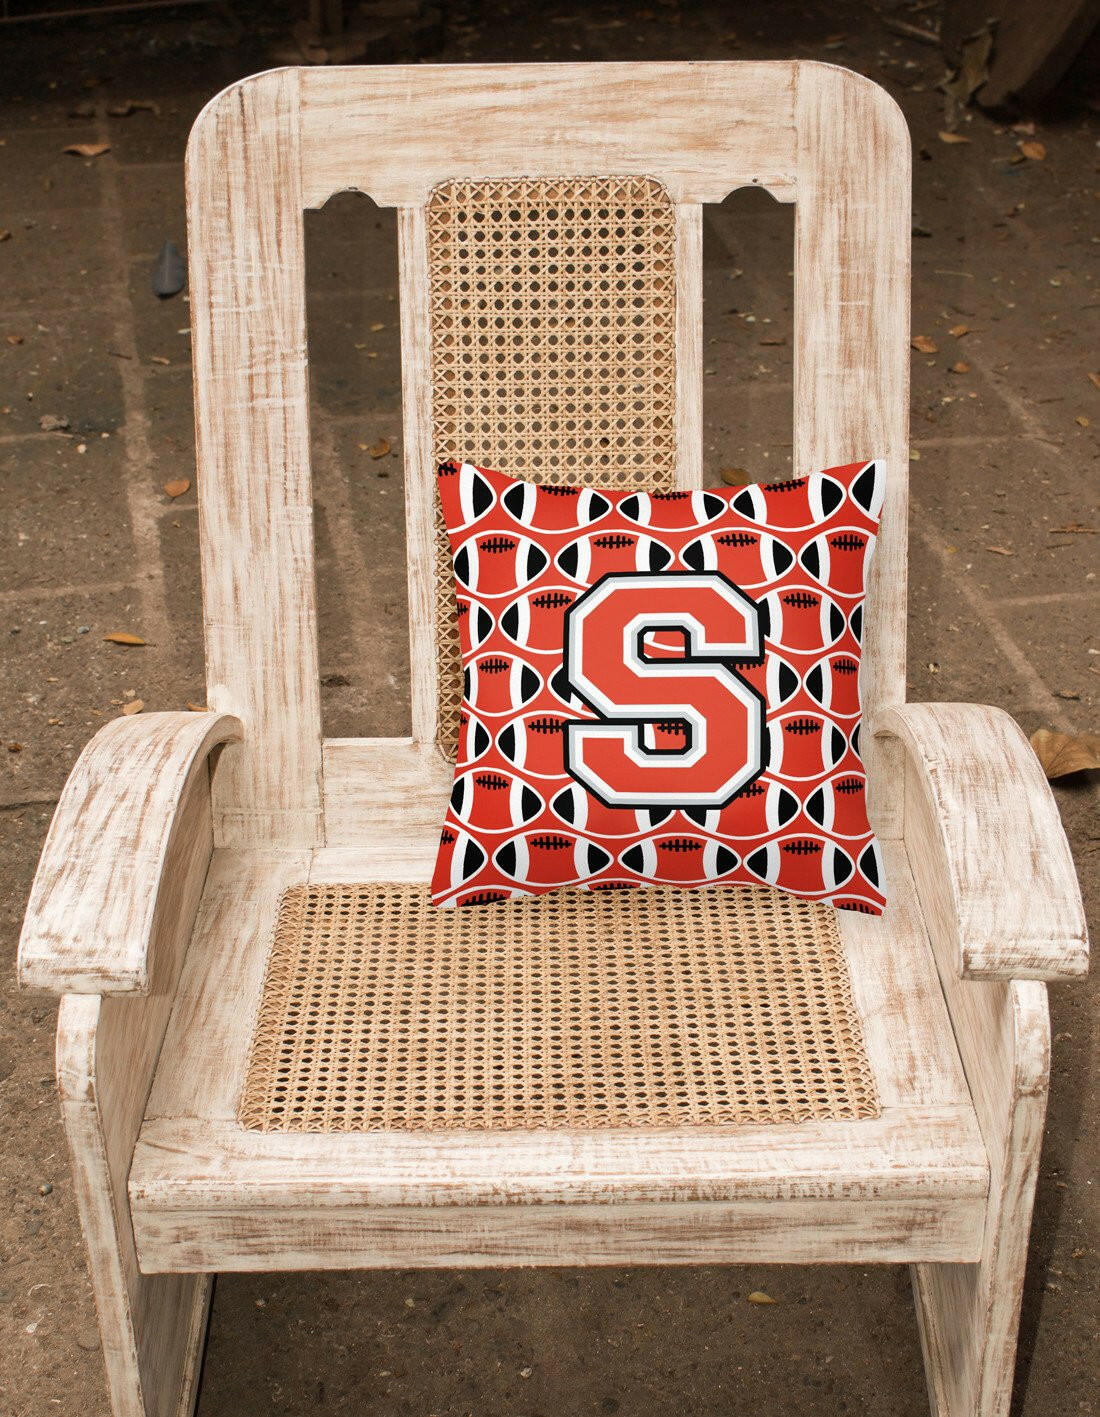 Letter S Football Scarlet and Grey Fabric Decorative Pillow CJ1067-SPW1414 by Caroline's Treasures